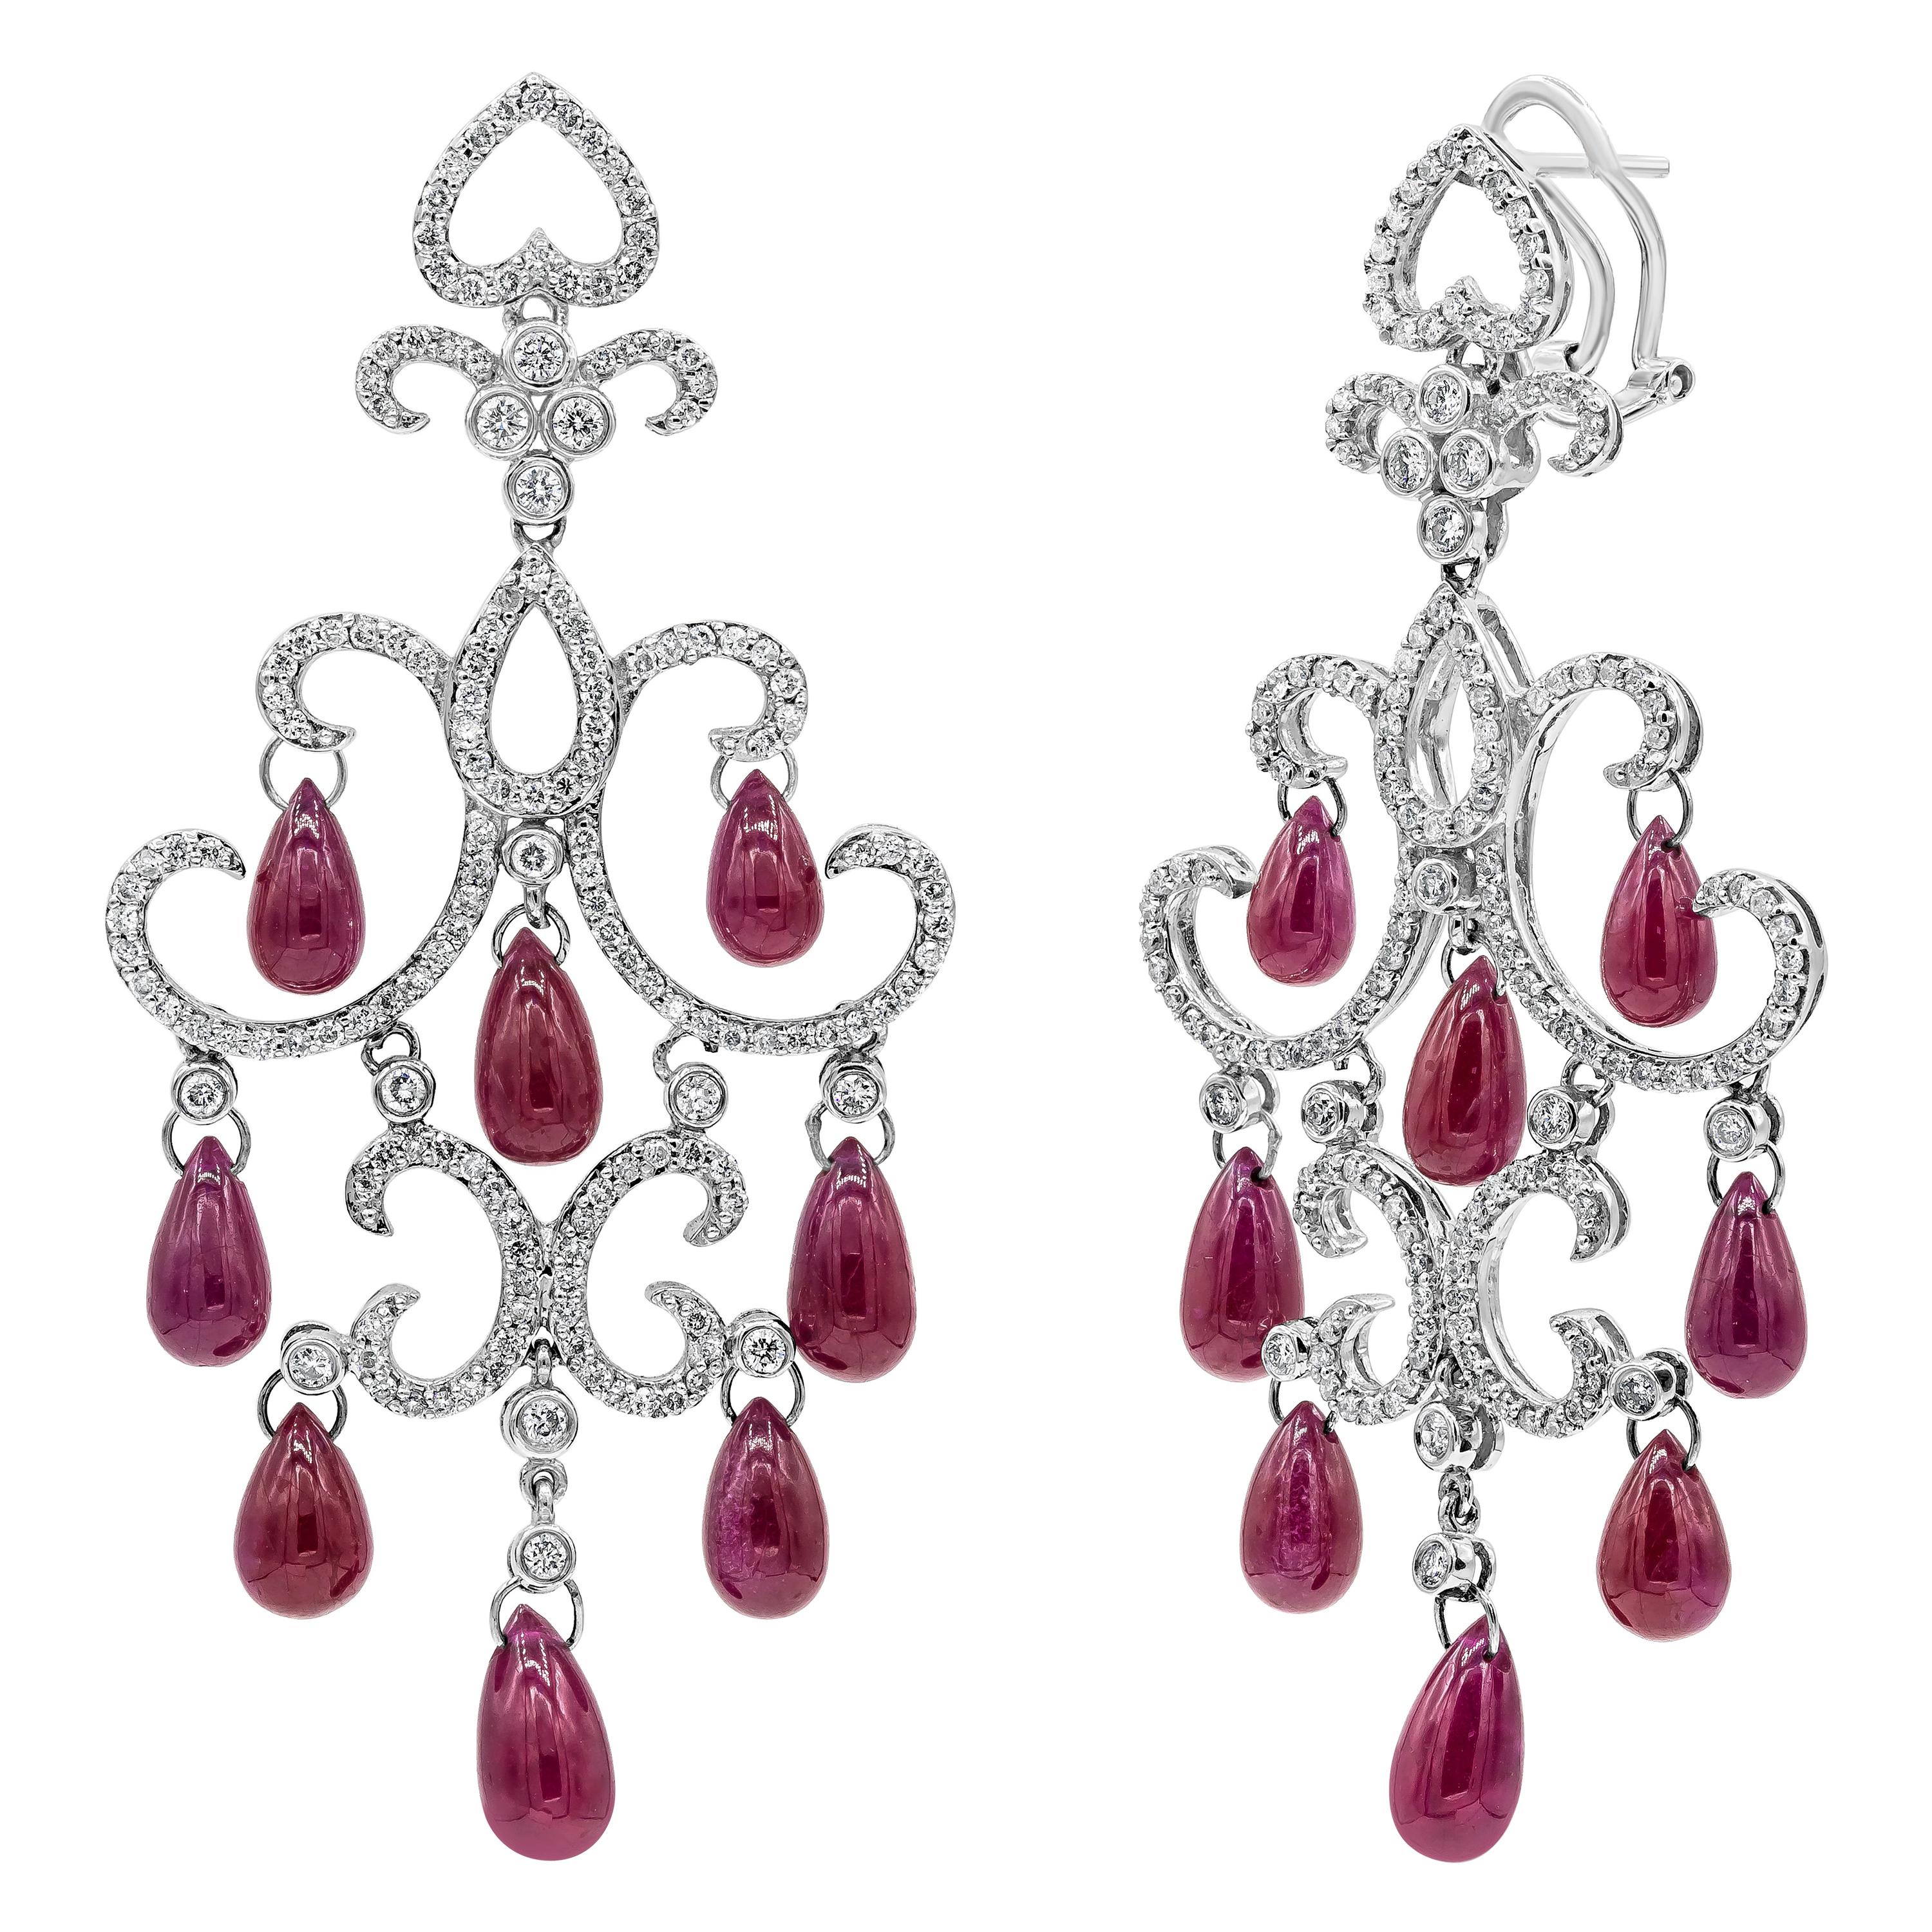 An intricately designed piece of chandelier earrings showcasing 16 color-rich dangling briolette rubies weighing 32.20 carats total. Accented with 328 brilliant round diamonds weighing 1.90 carats total in a chandelier design. Perfectly made in 18K